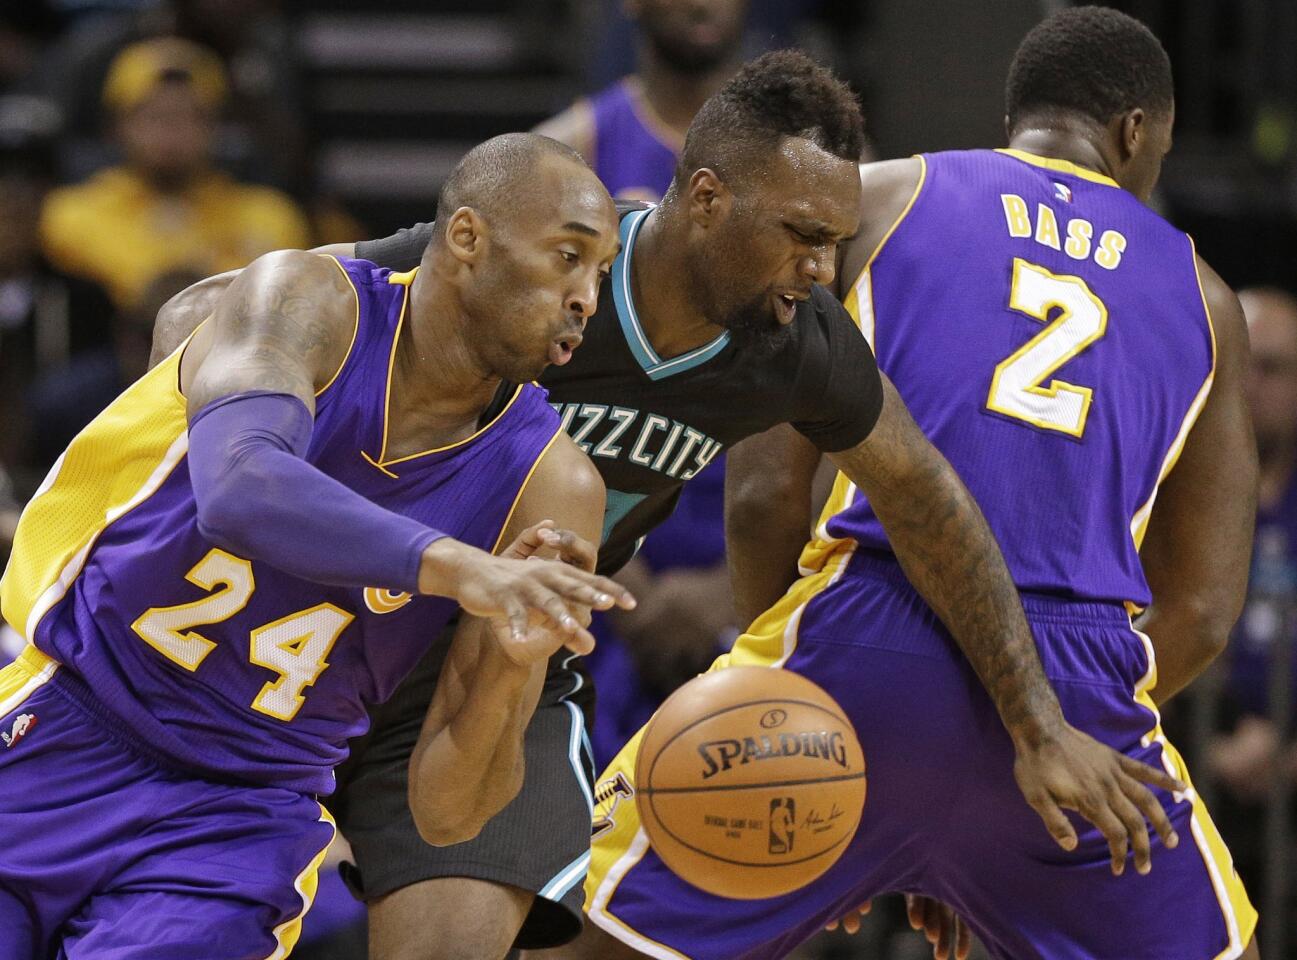 Lakers forward Kobe Bryant (24) drives past Hornets forward P.J. Hairston, center, as Brandon Bass tries to set a screen in the first half.